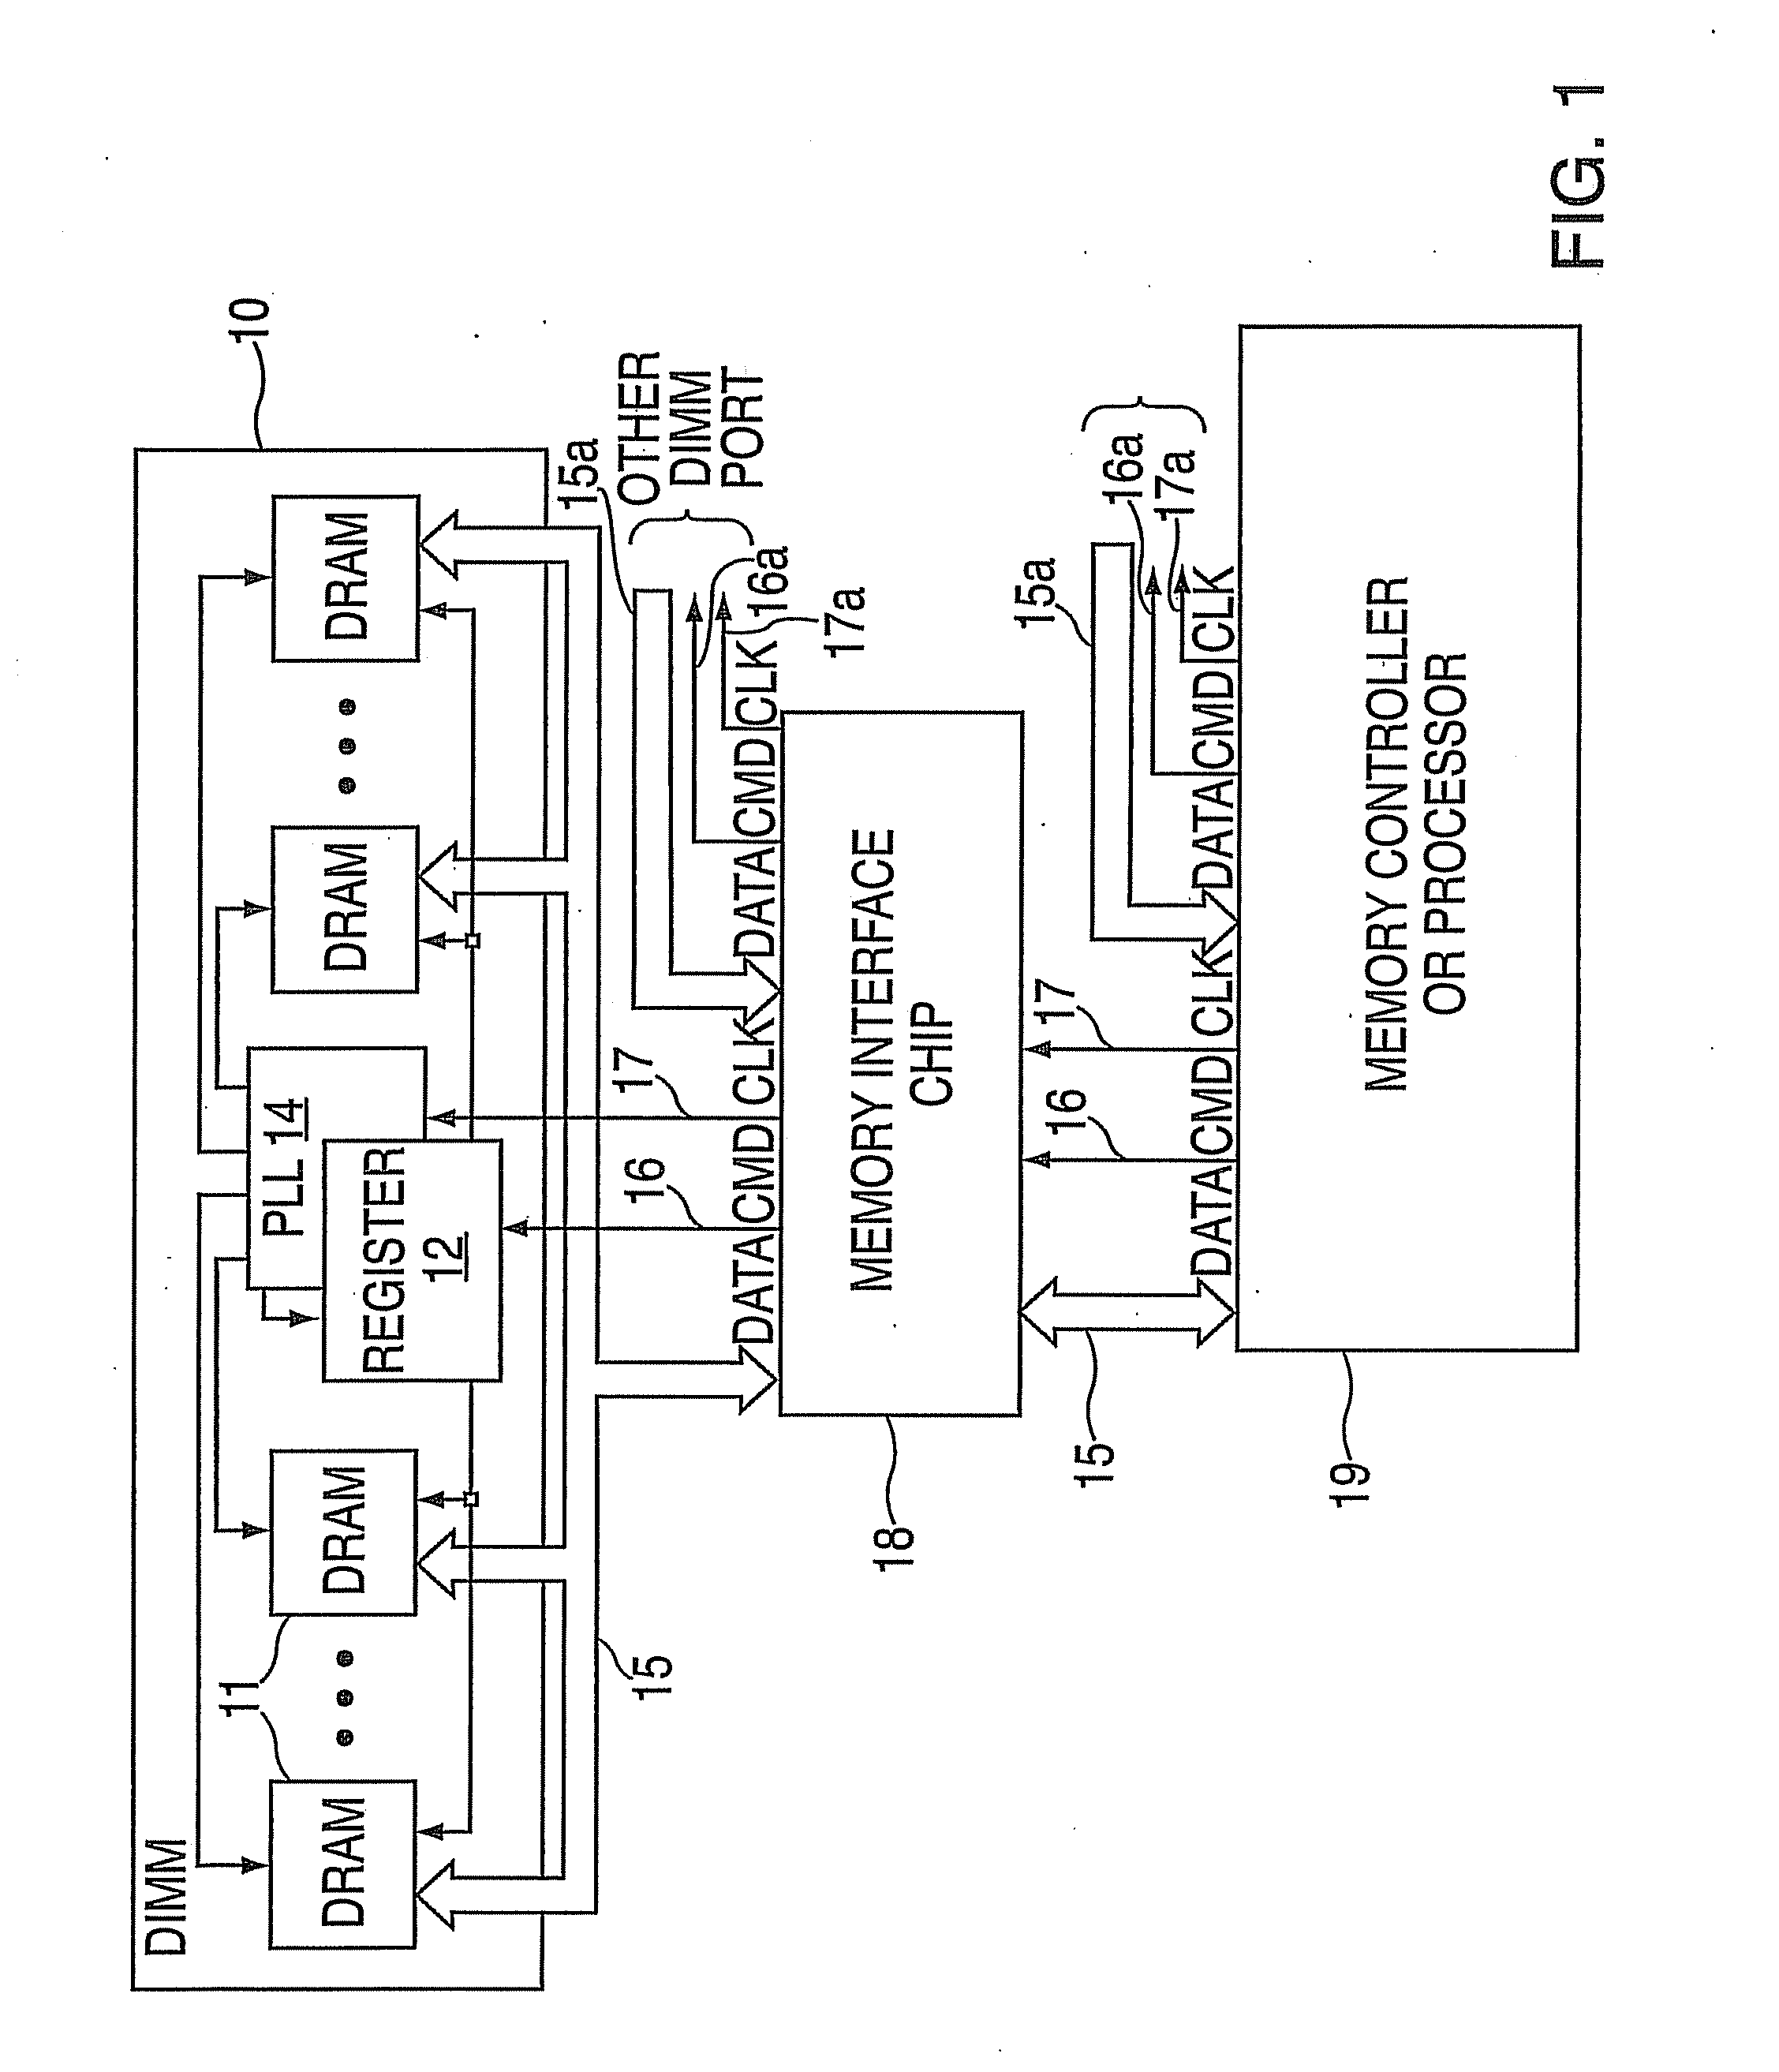 High density high reliability memory module with a fault tolerant address and command bus